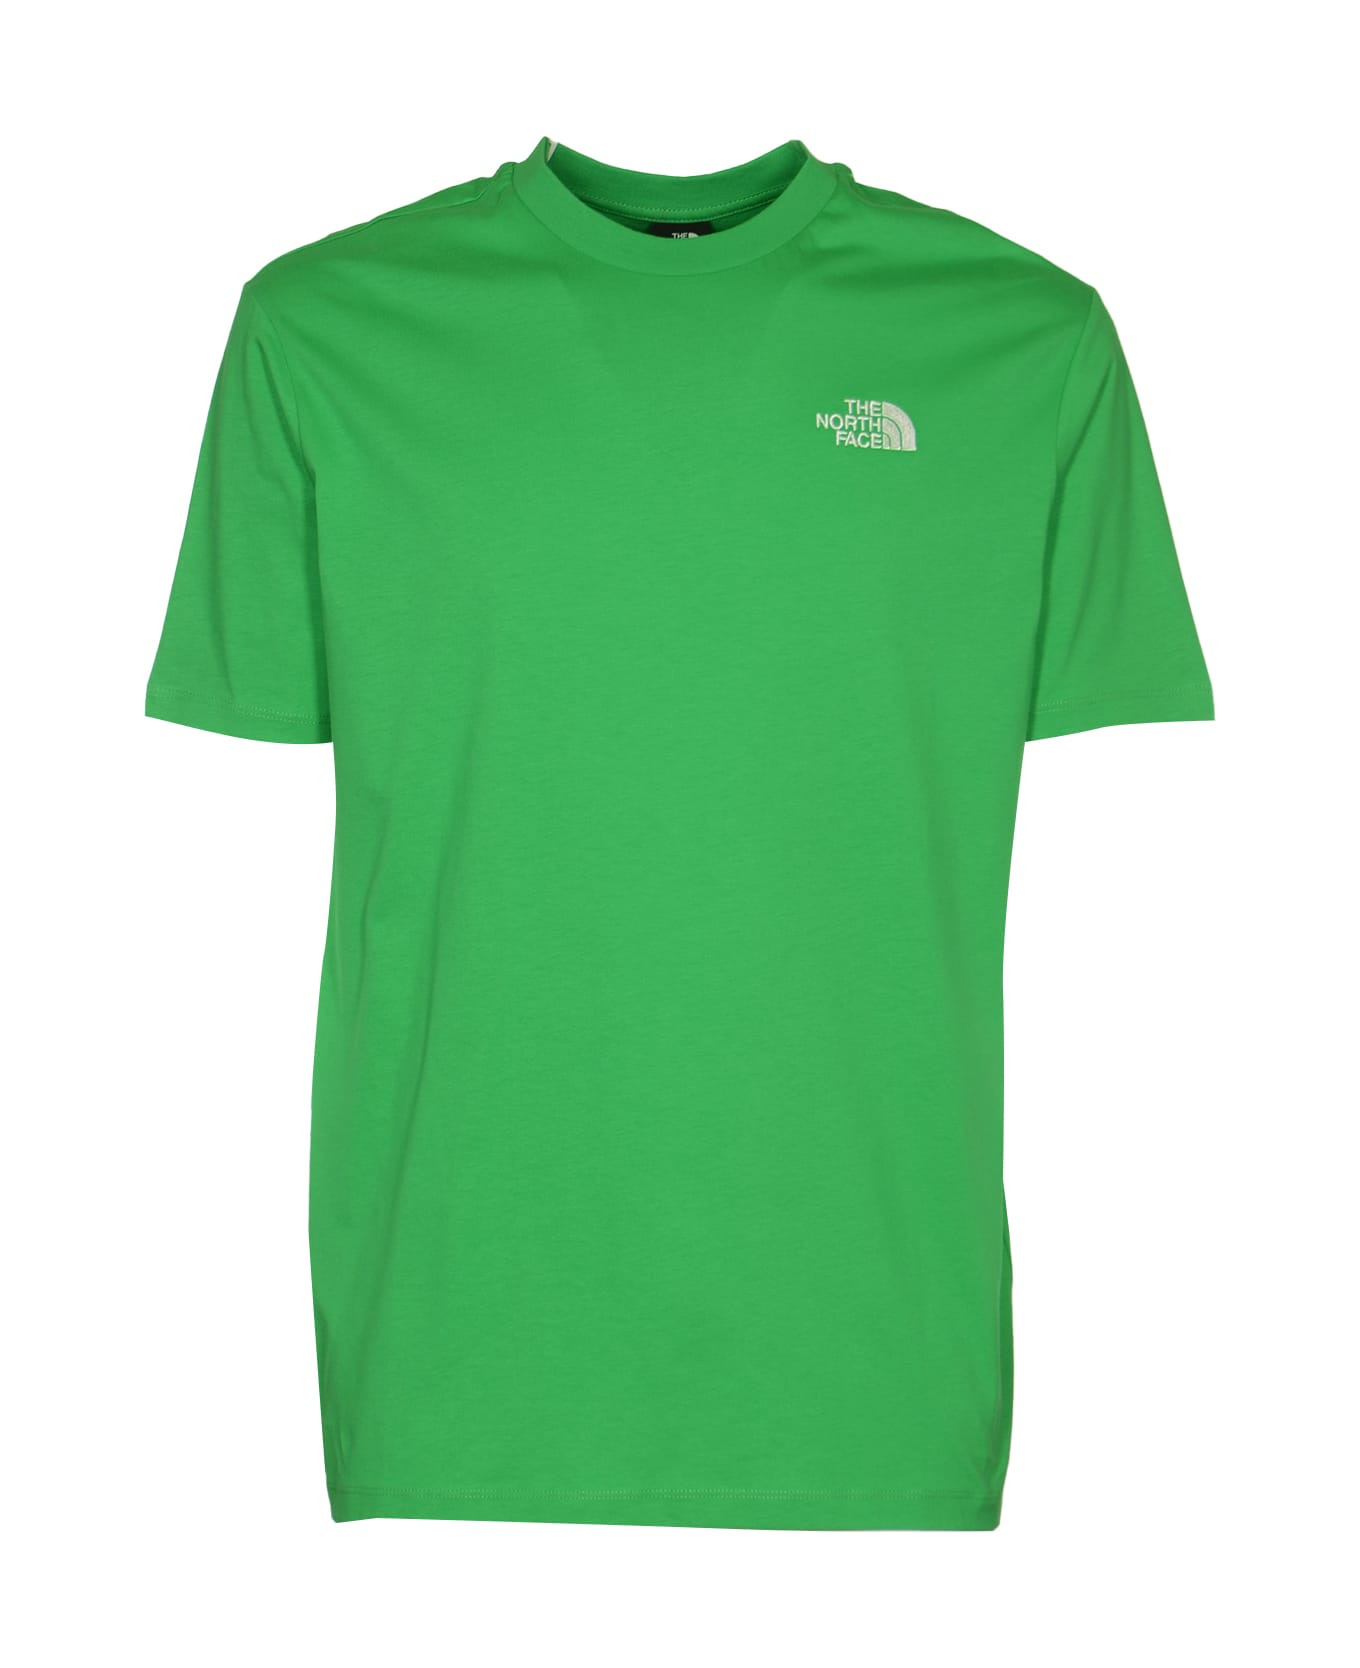 The North Face Essential Oversize T-shirt - Optic Emerald